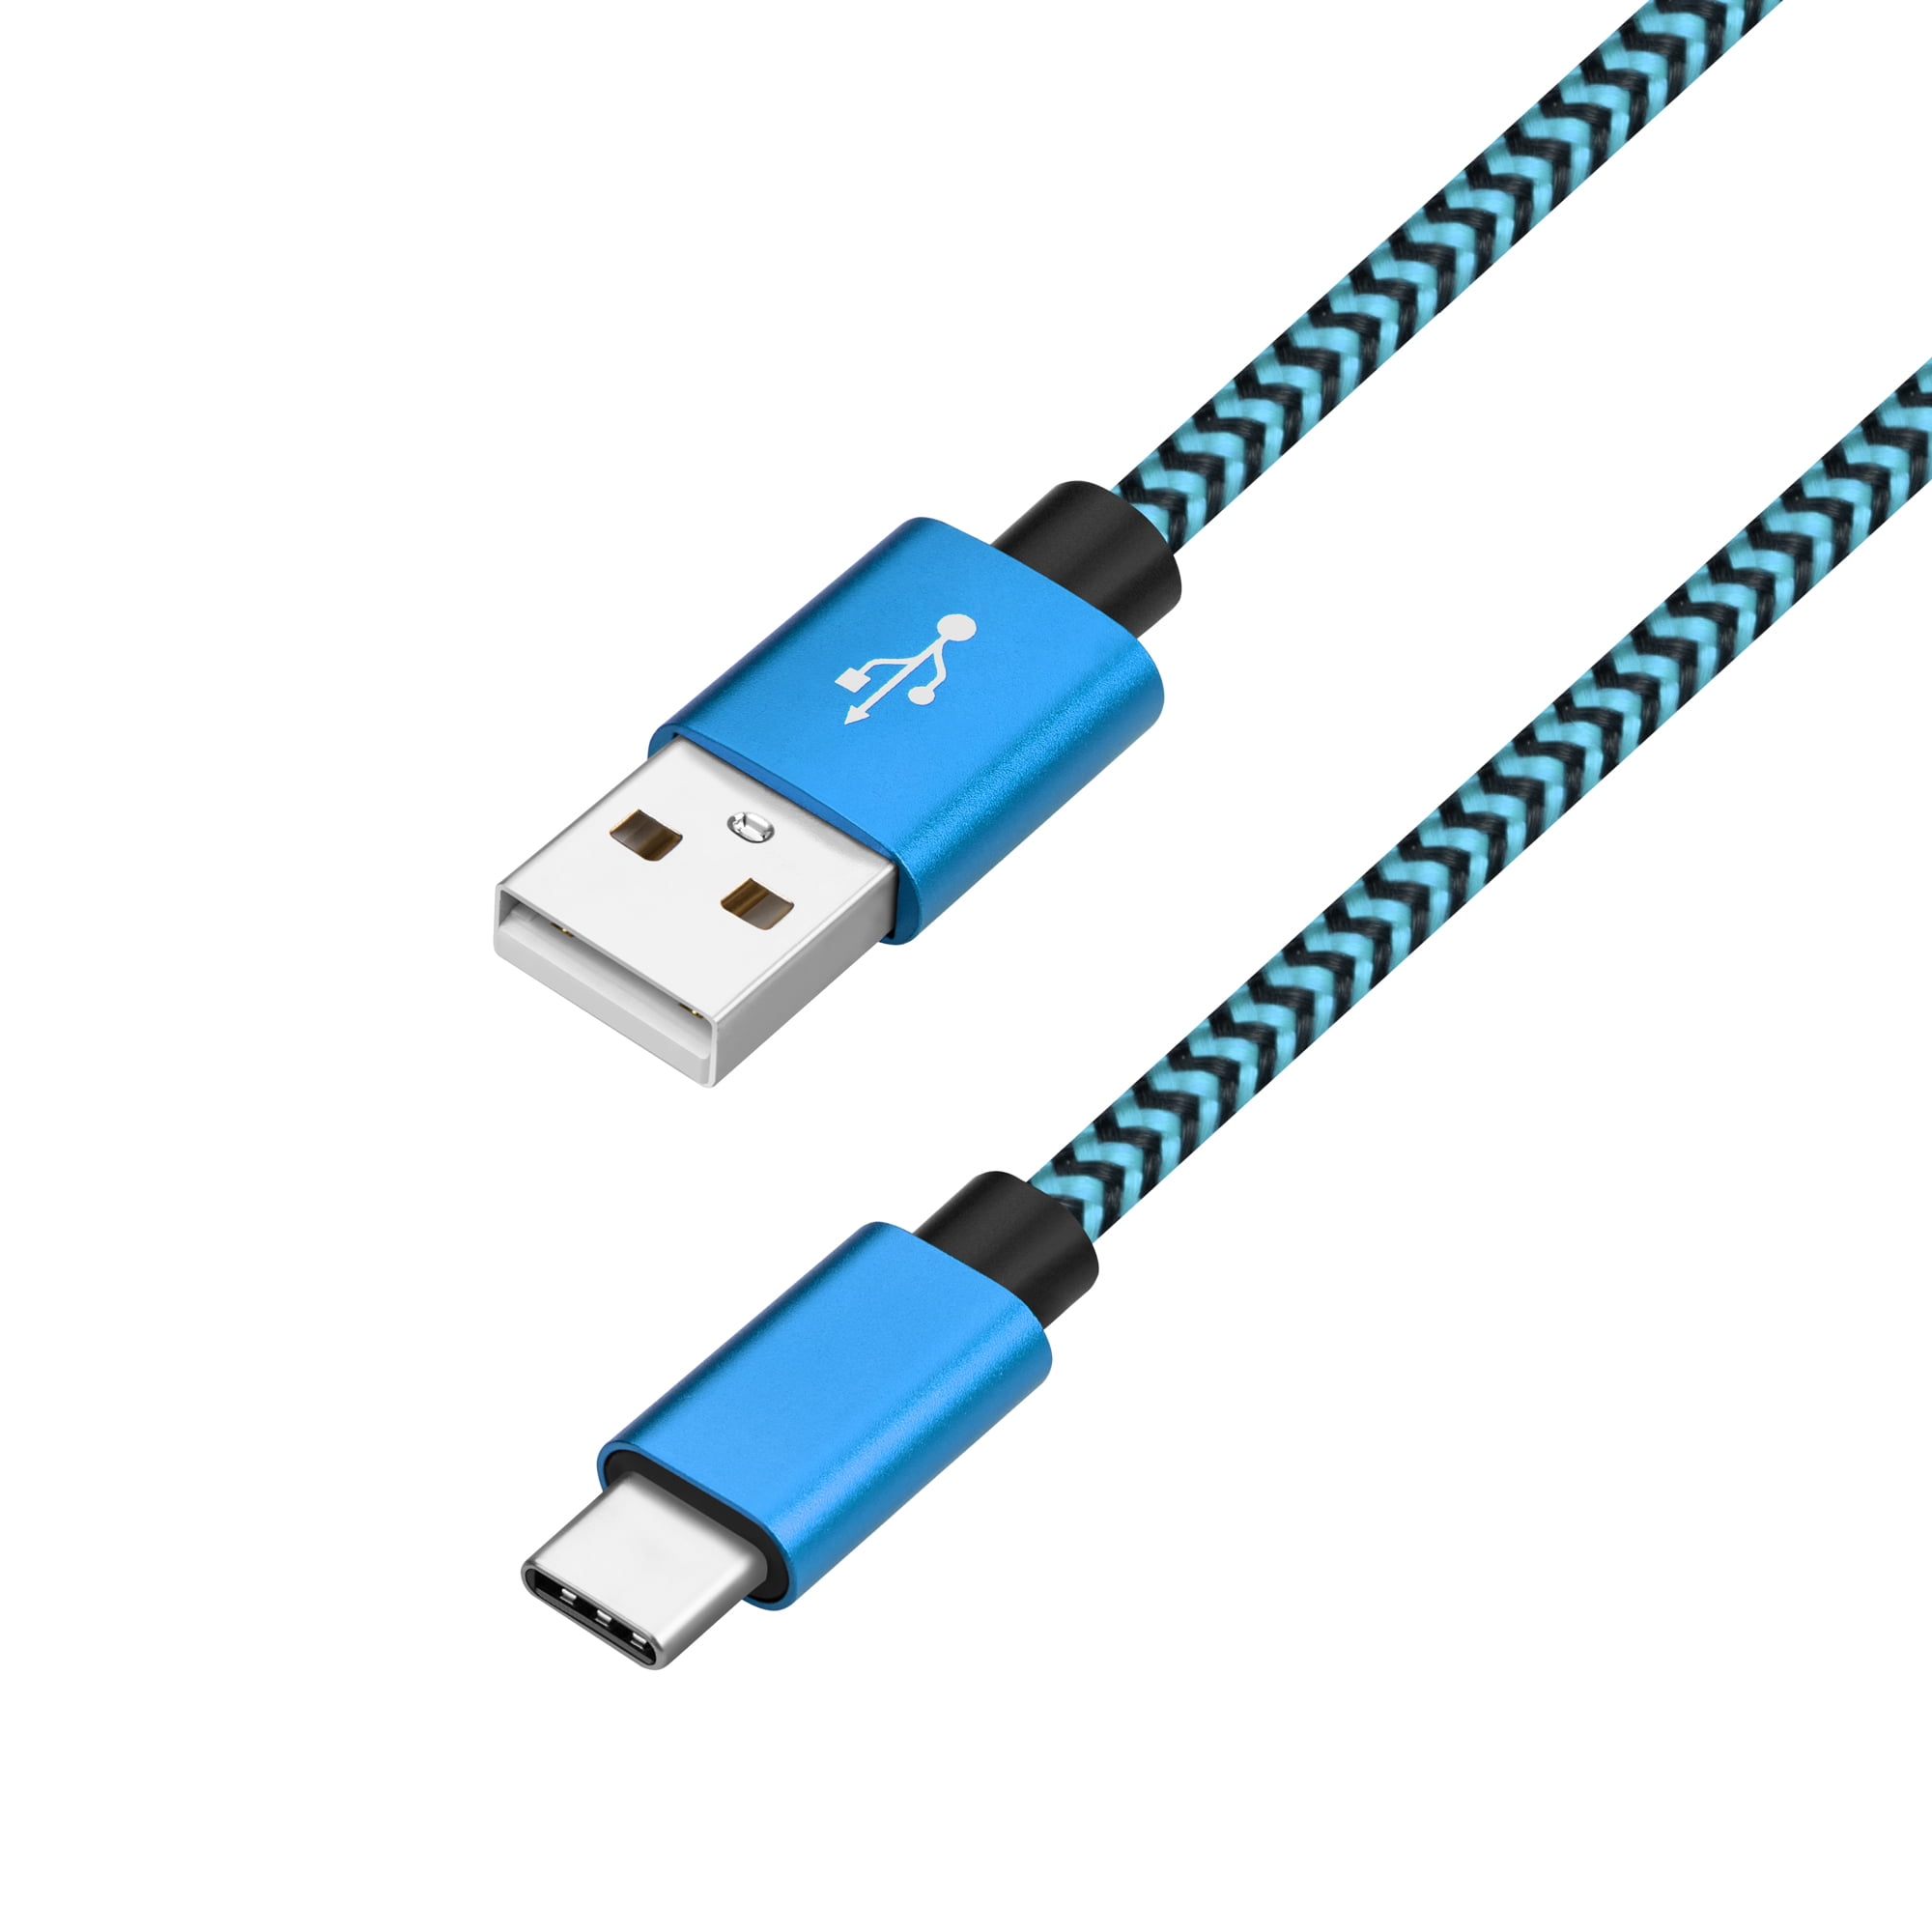 L-com WPUSB Series Waterproof USB Cable with Type A M/F 0.5M